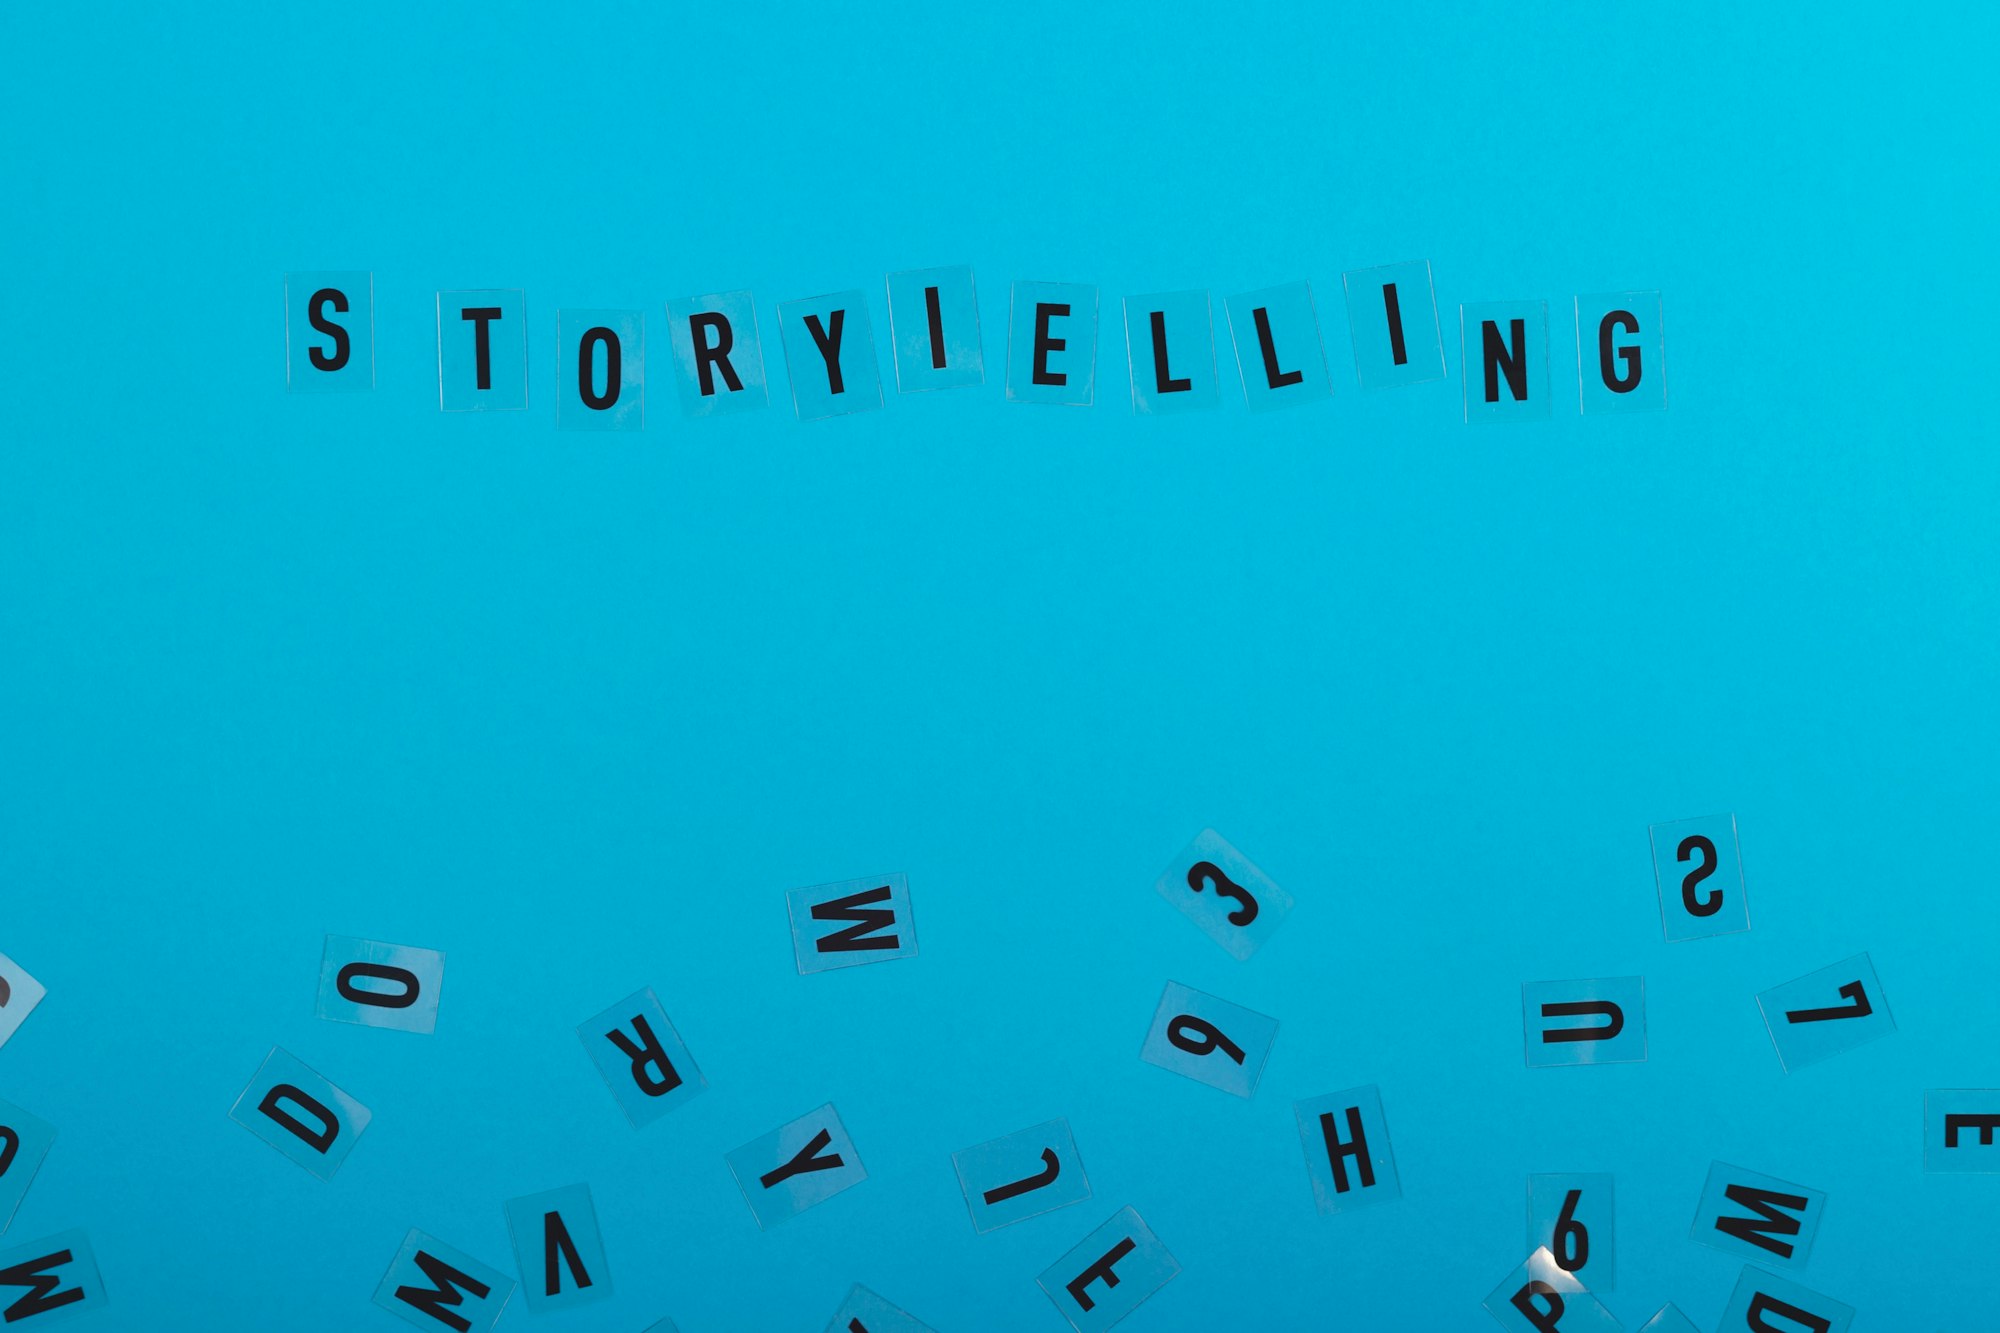 Storytelling is written on a light blue background among black letters. Marketing and content